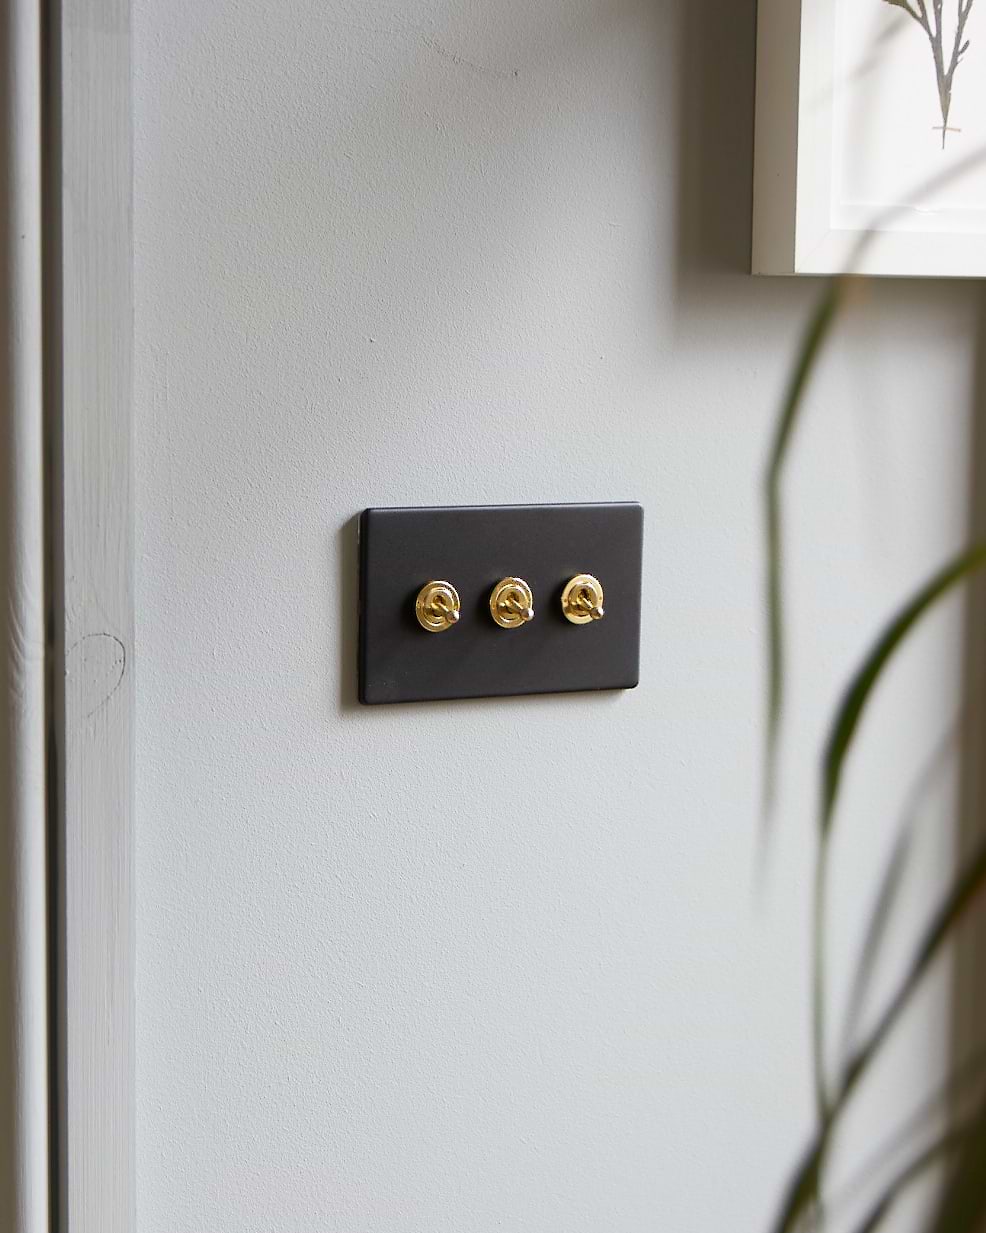 How To Choose Sockets & Switches For Your Décor Theme - Insiders Guide